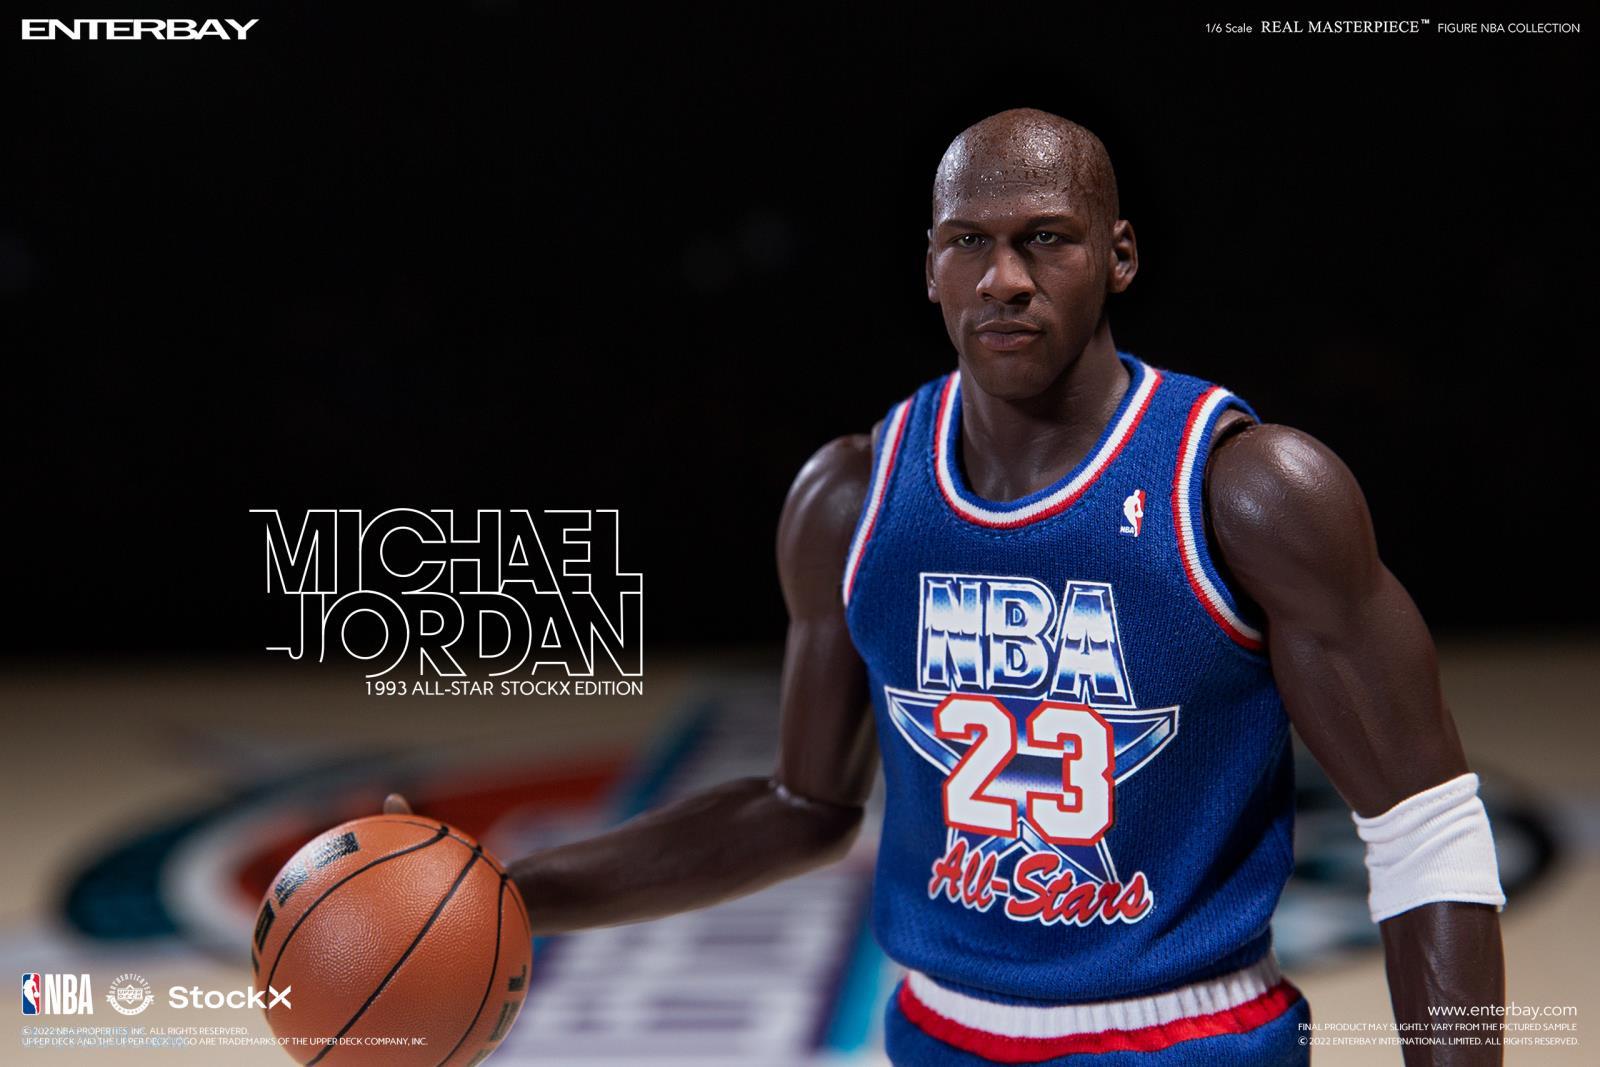 NEW PRODUCT: Enterbay - Real Masterpiece NBA Collection Michael Jordan All Star 1993 Edition 0288